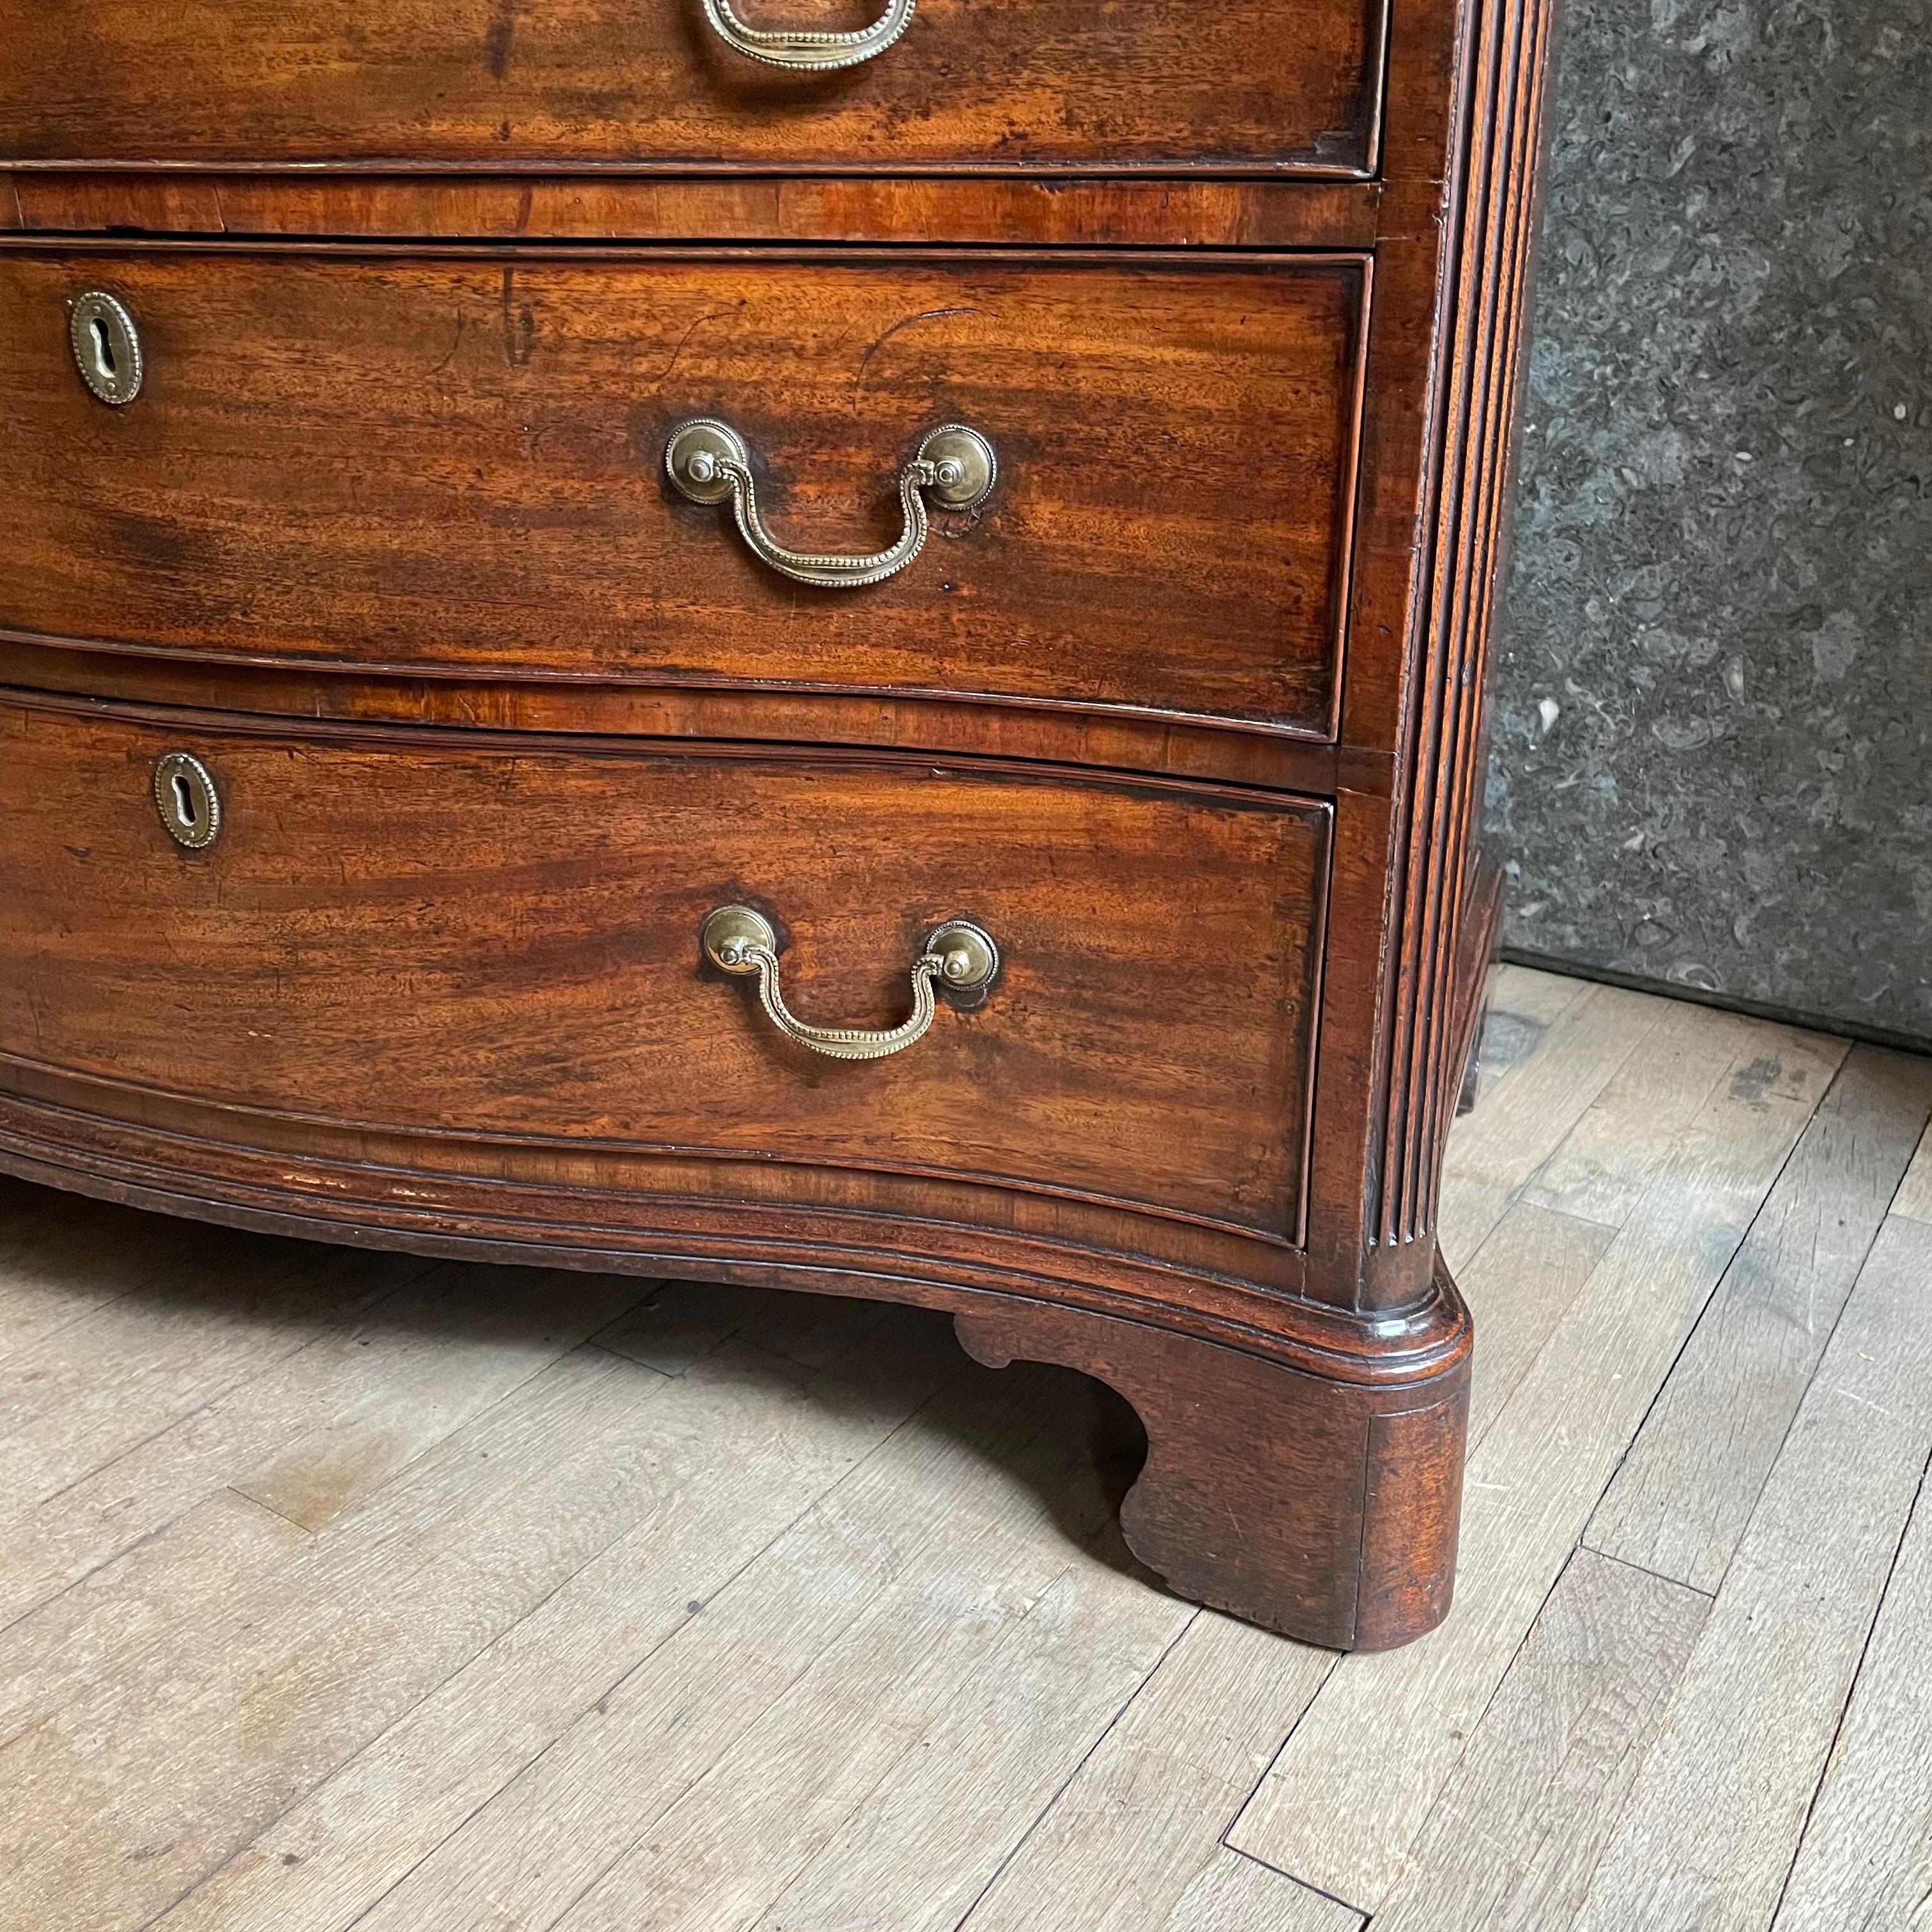 Chippendale Satinwood & Tulipwood Inlaid Mahogany Serpentine Chest of Drawers 1